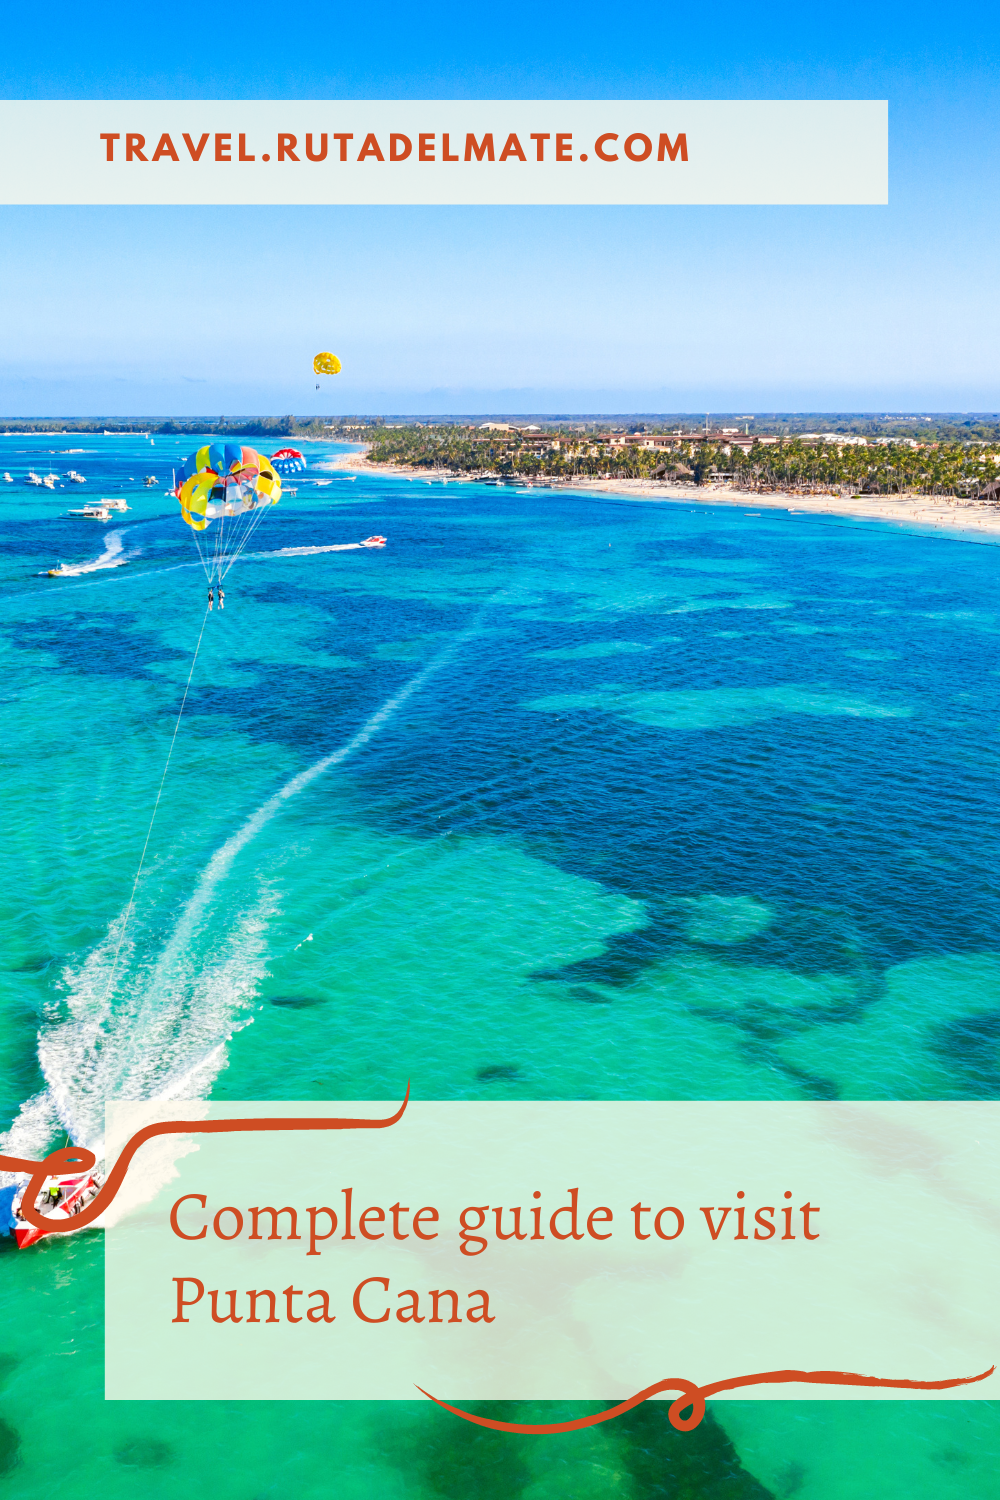 Travel Guide to Punta Cana